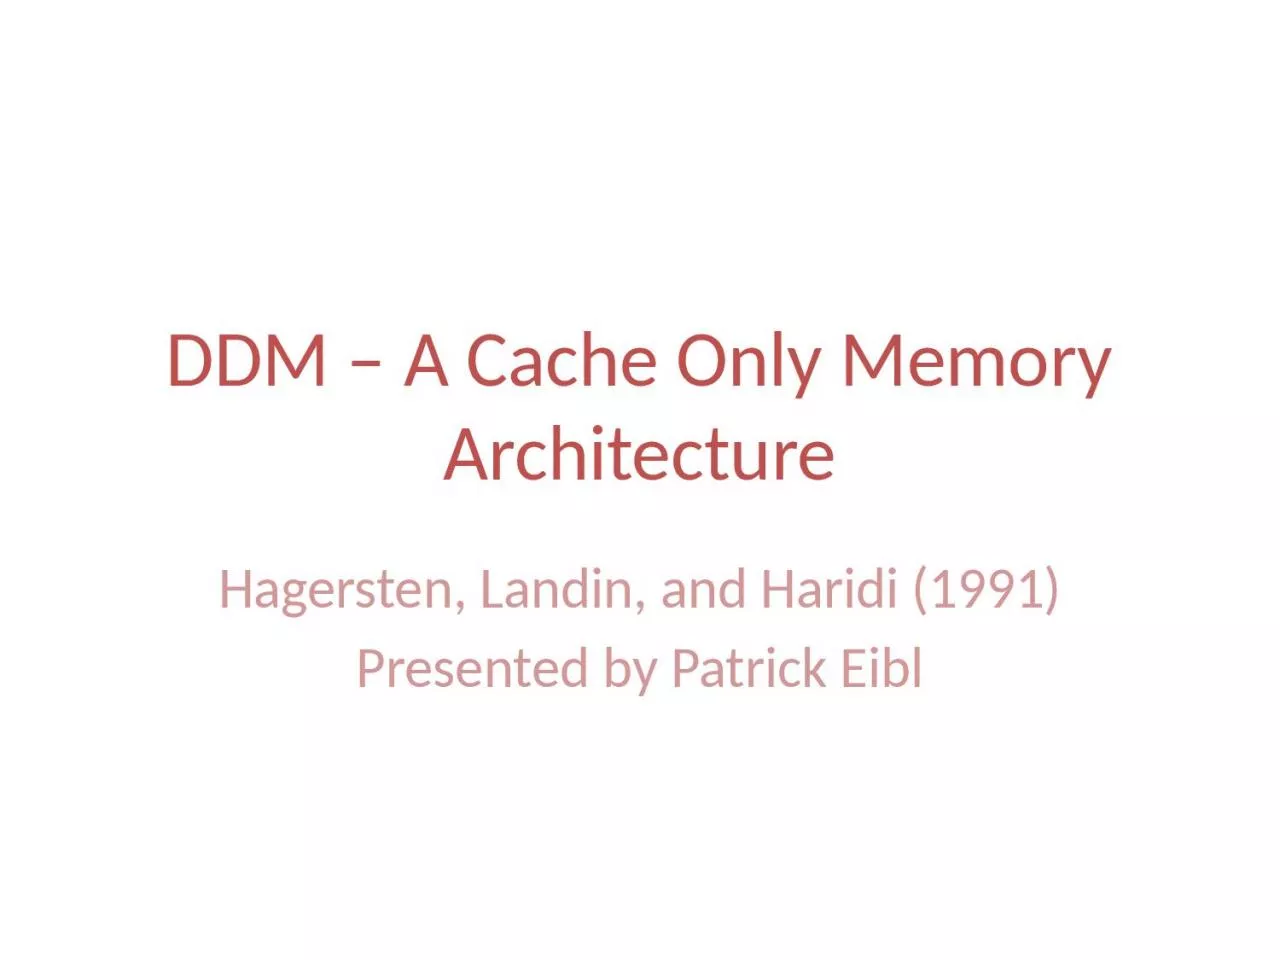 DDM – A Cache Only Memory Architecture